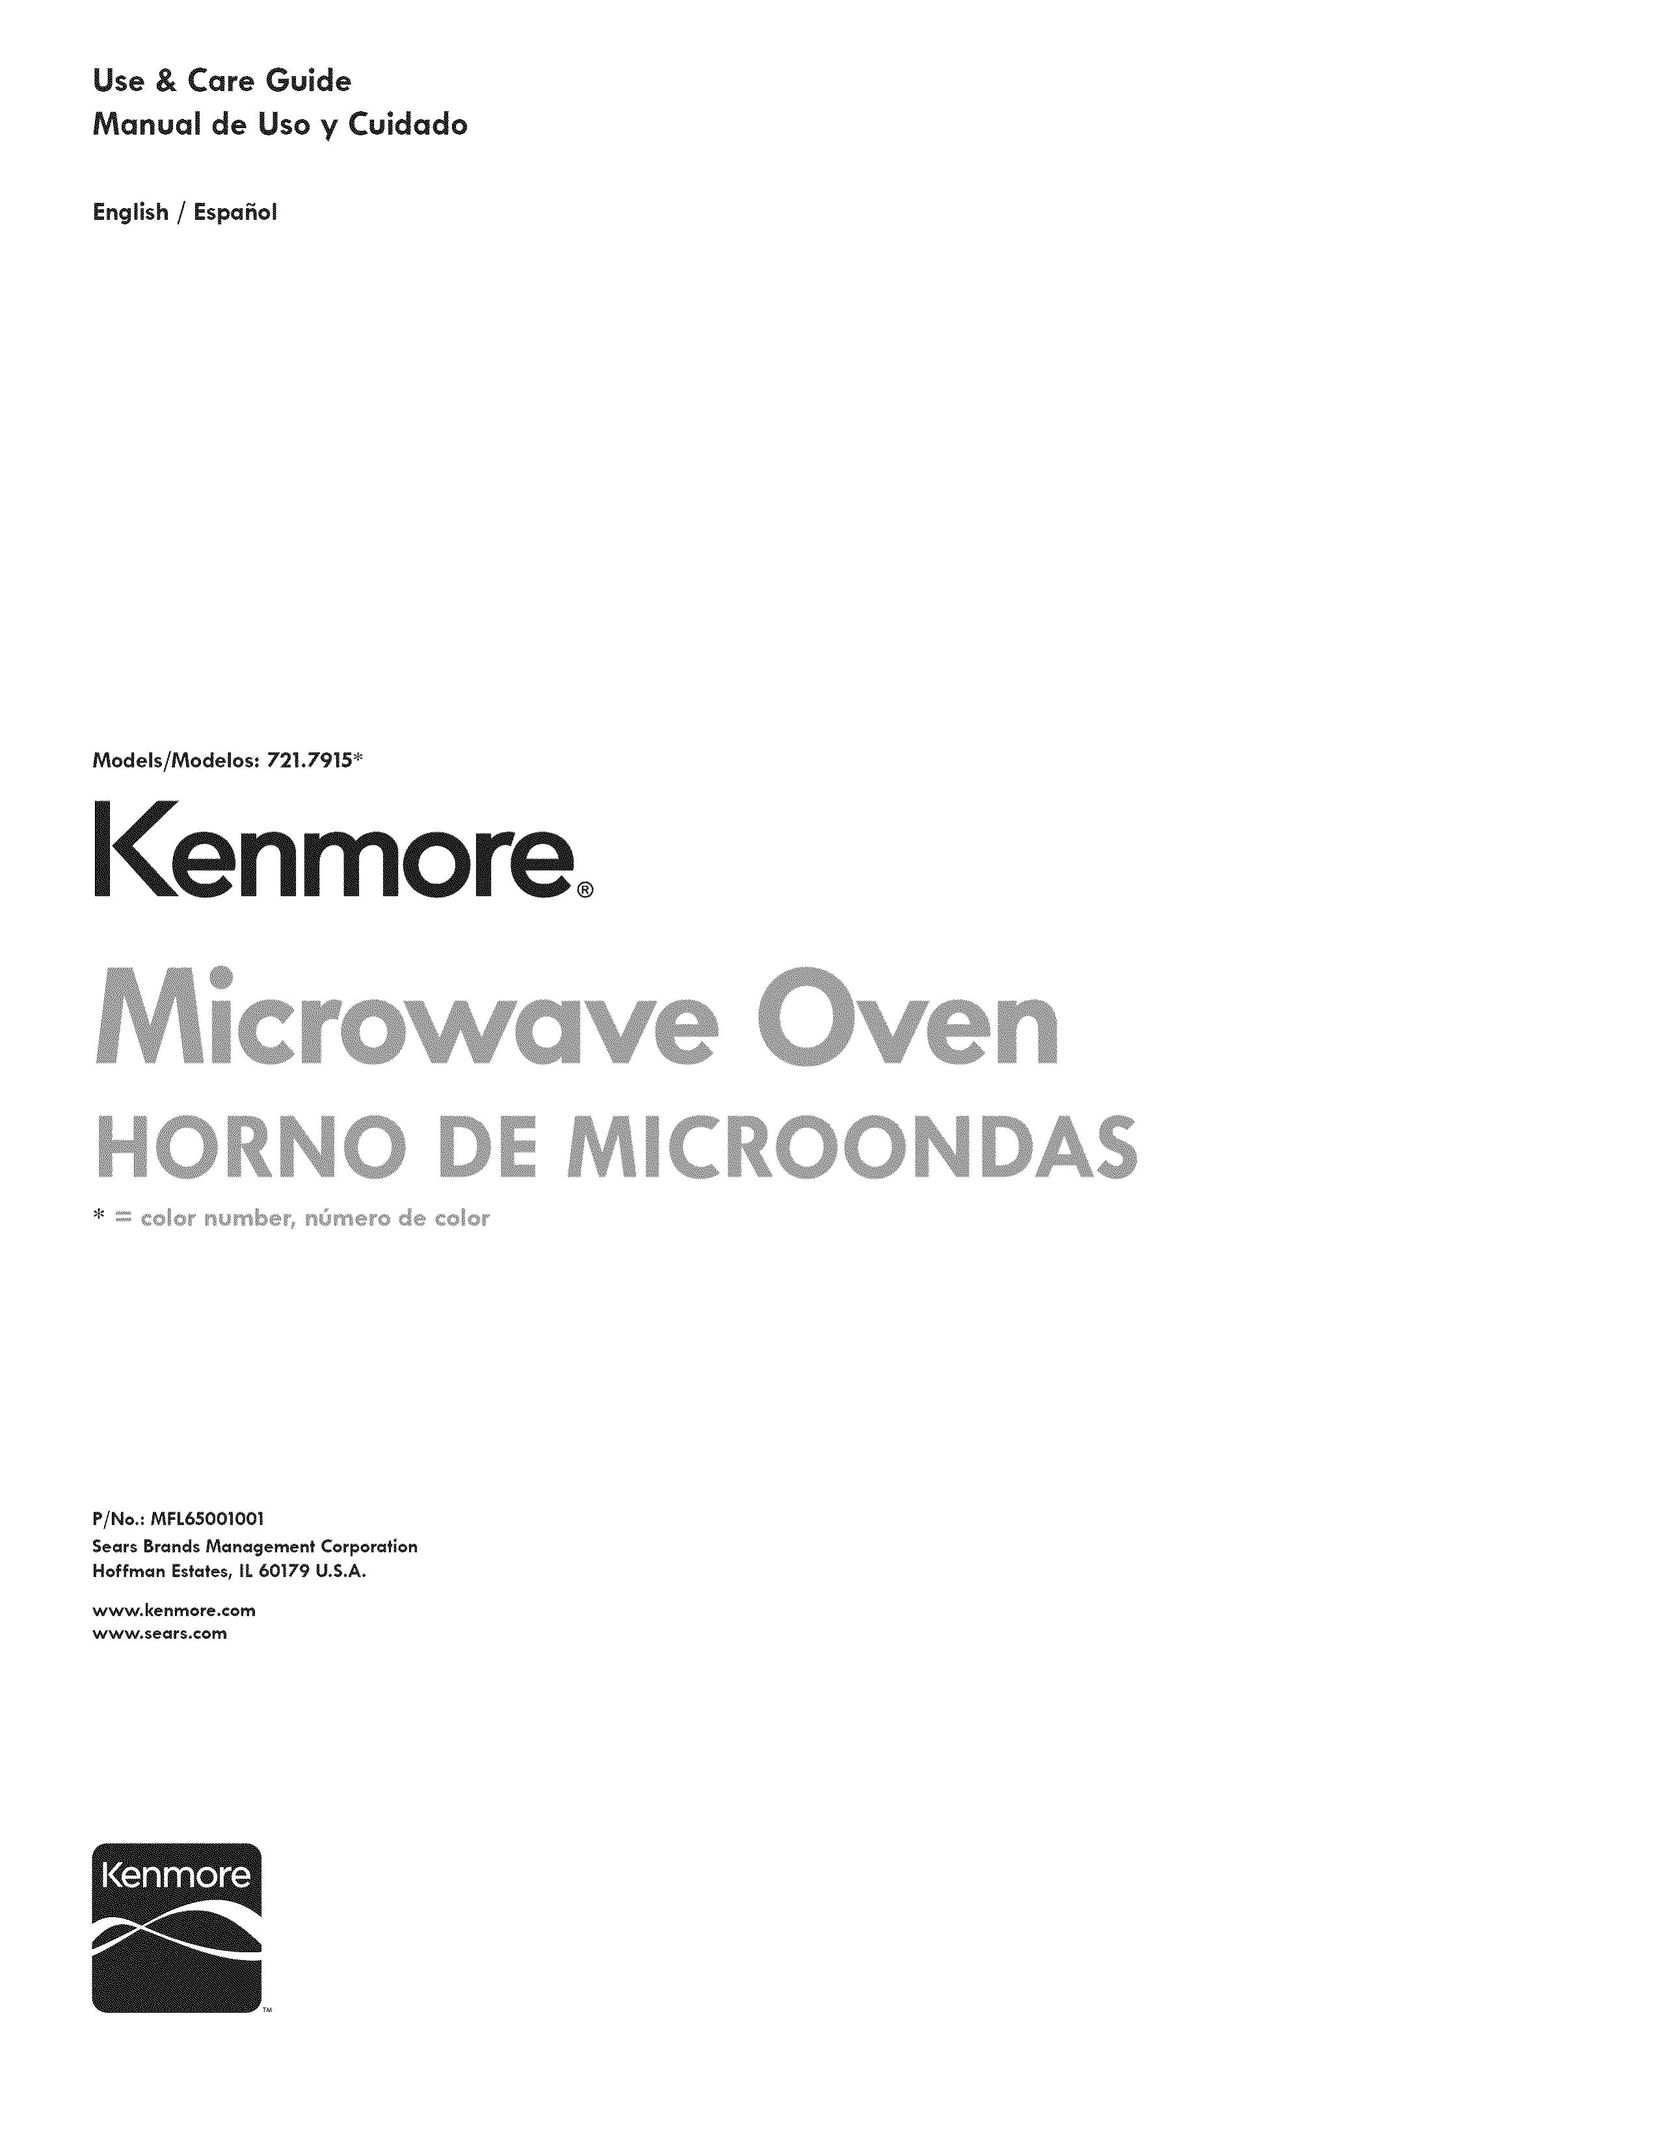 Kenmore 721.7915 Microwave Oven User Manual